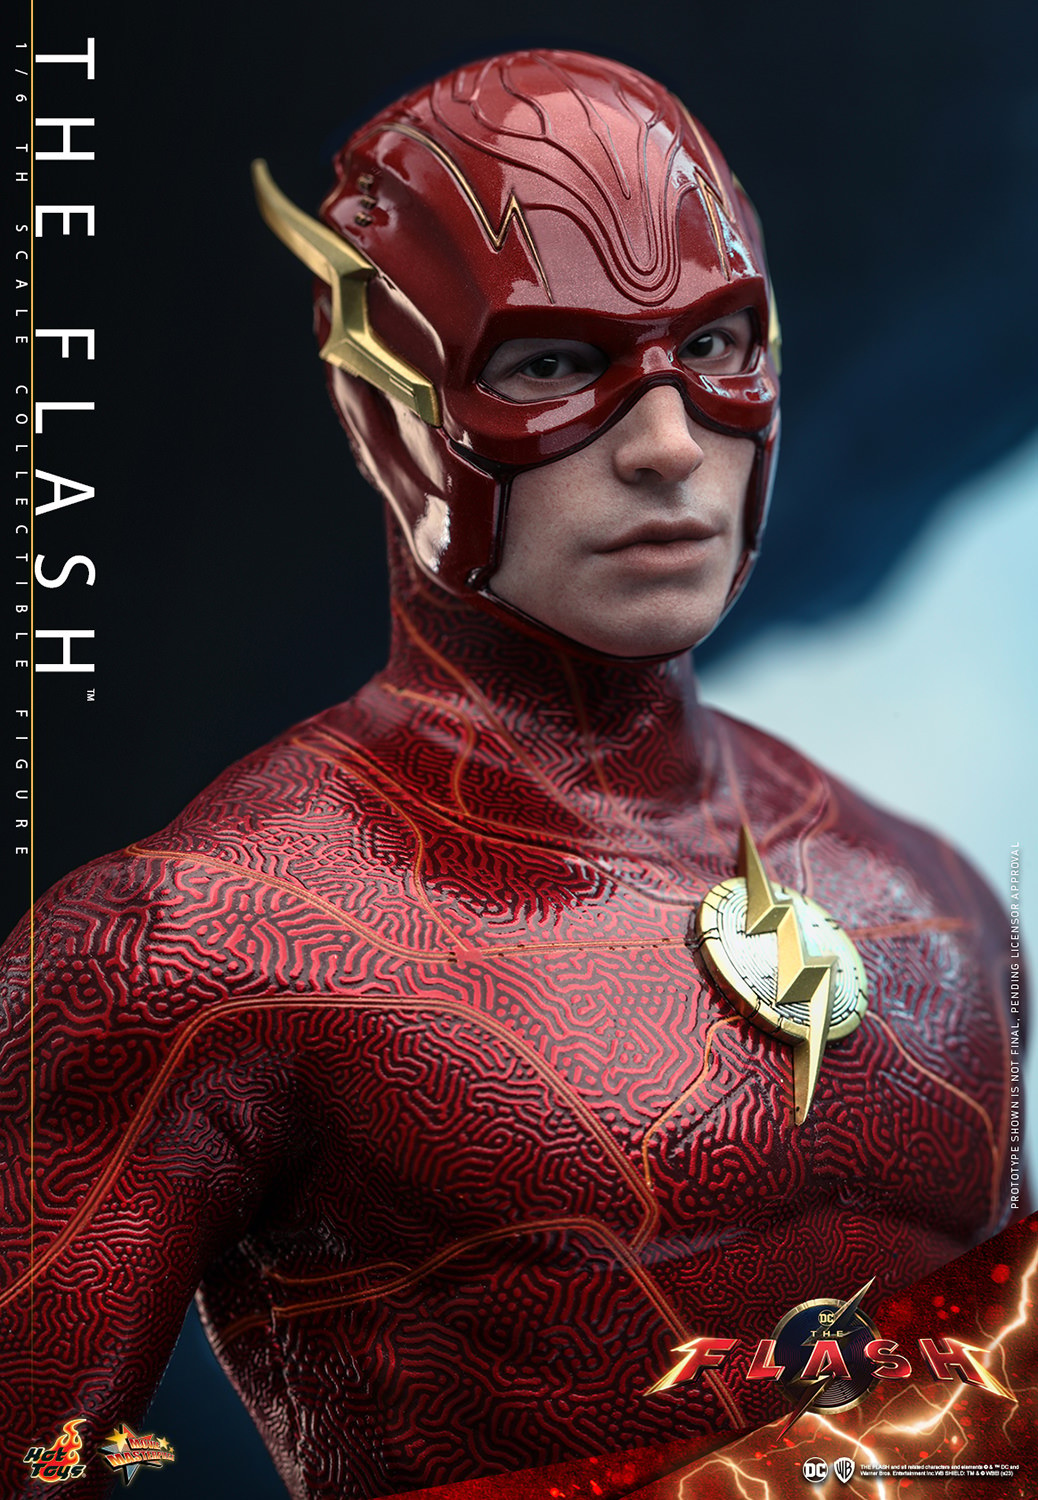 The Flash (Special Edition) (Prototype Shown) View 14